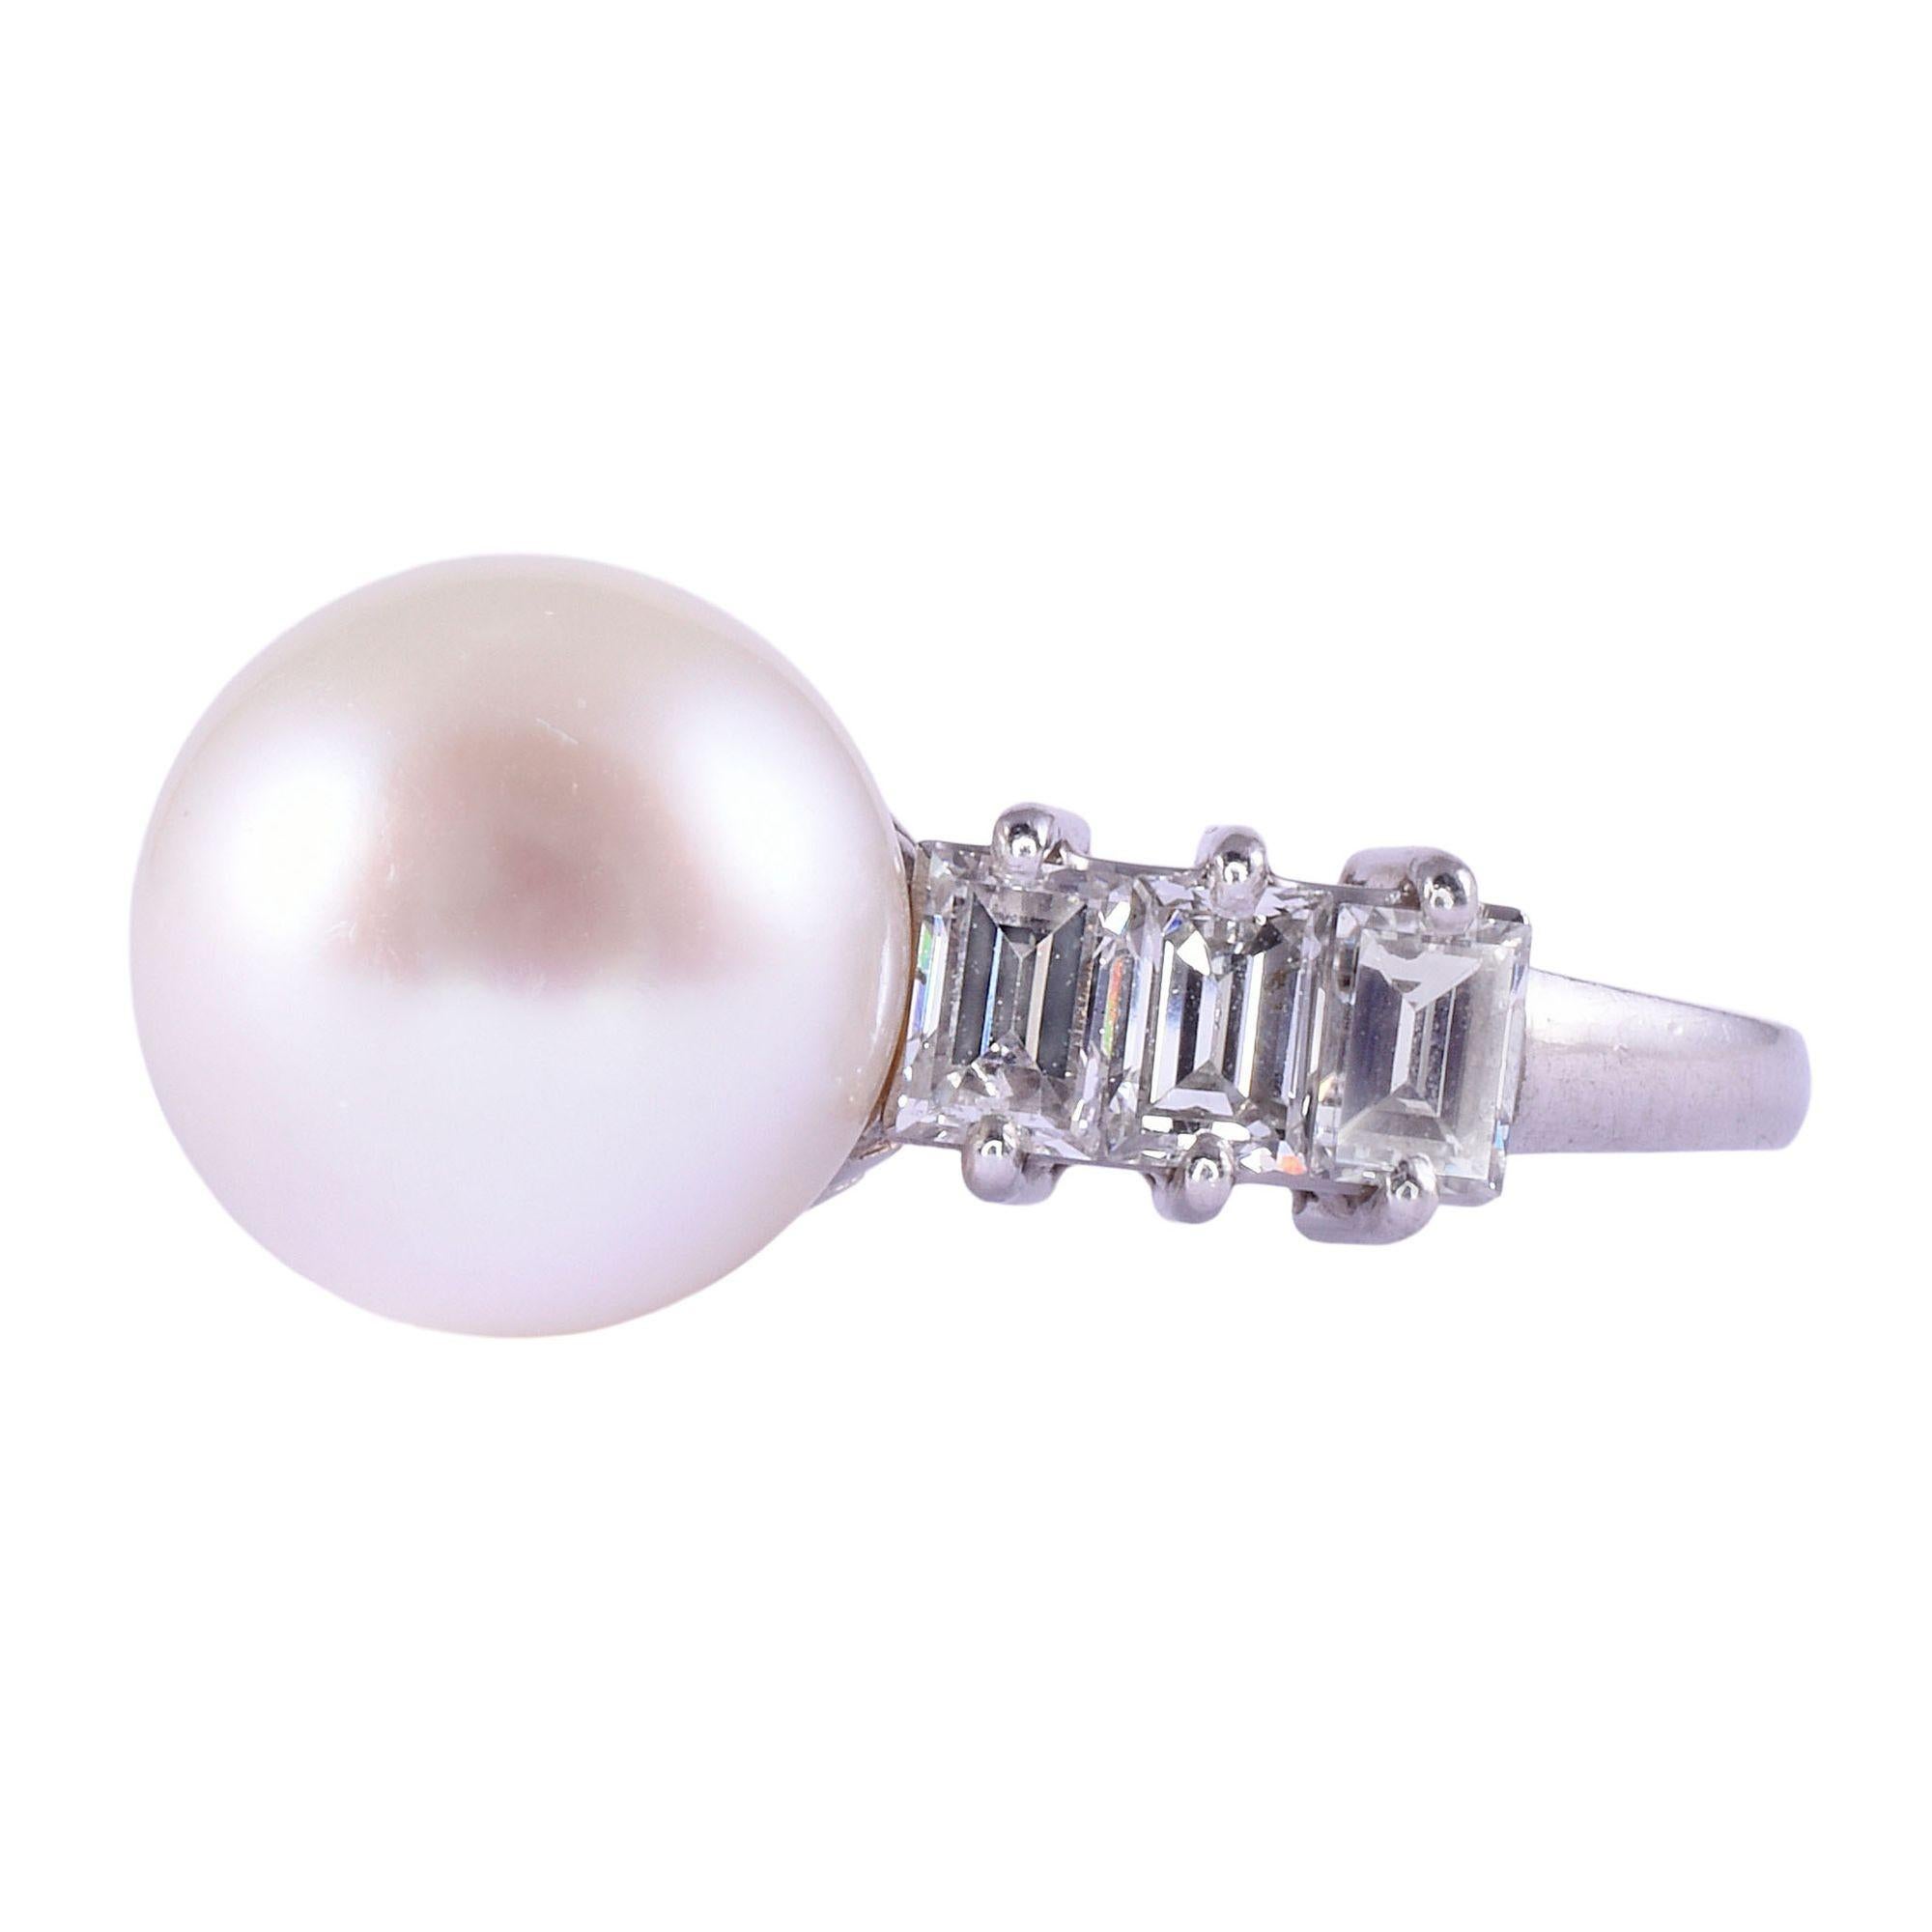 Vintage Akoya pearl & baguette diamond platinum ring, circa 1960. This vintage pearl ring is crafted in platinum and features a 9.9mm Akoya pearl. The Akoya pearl ring is accented with .90 carat total weight of baguette diamonds with VS clarity and